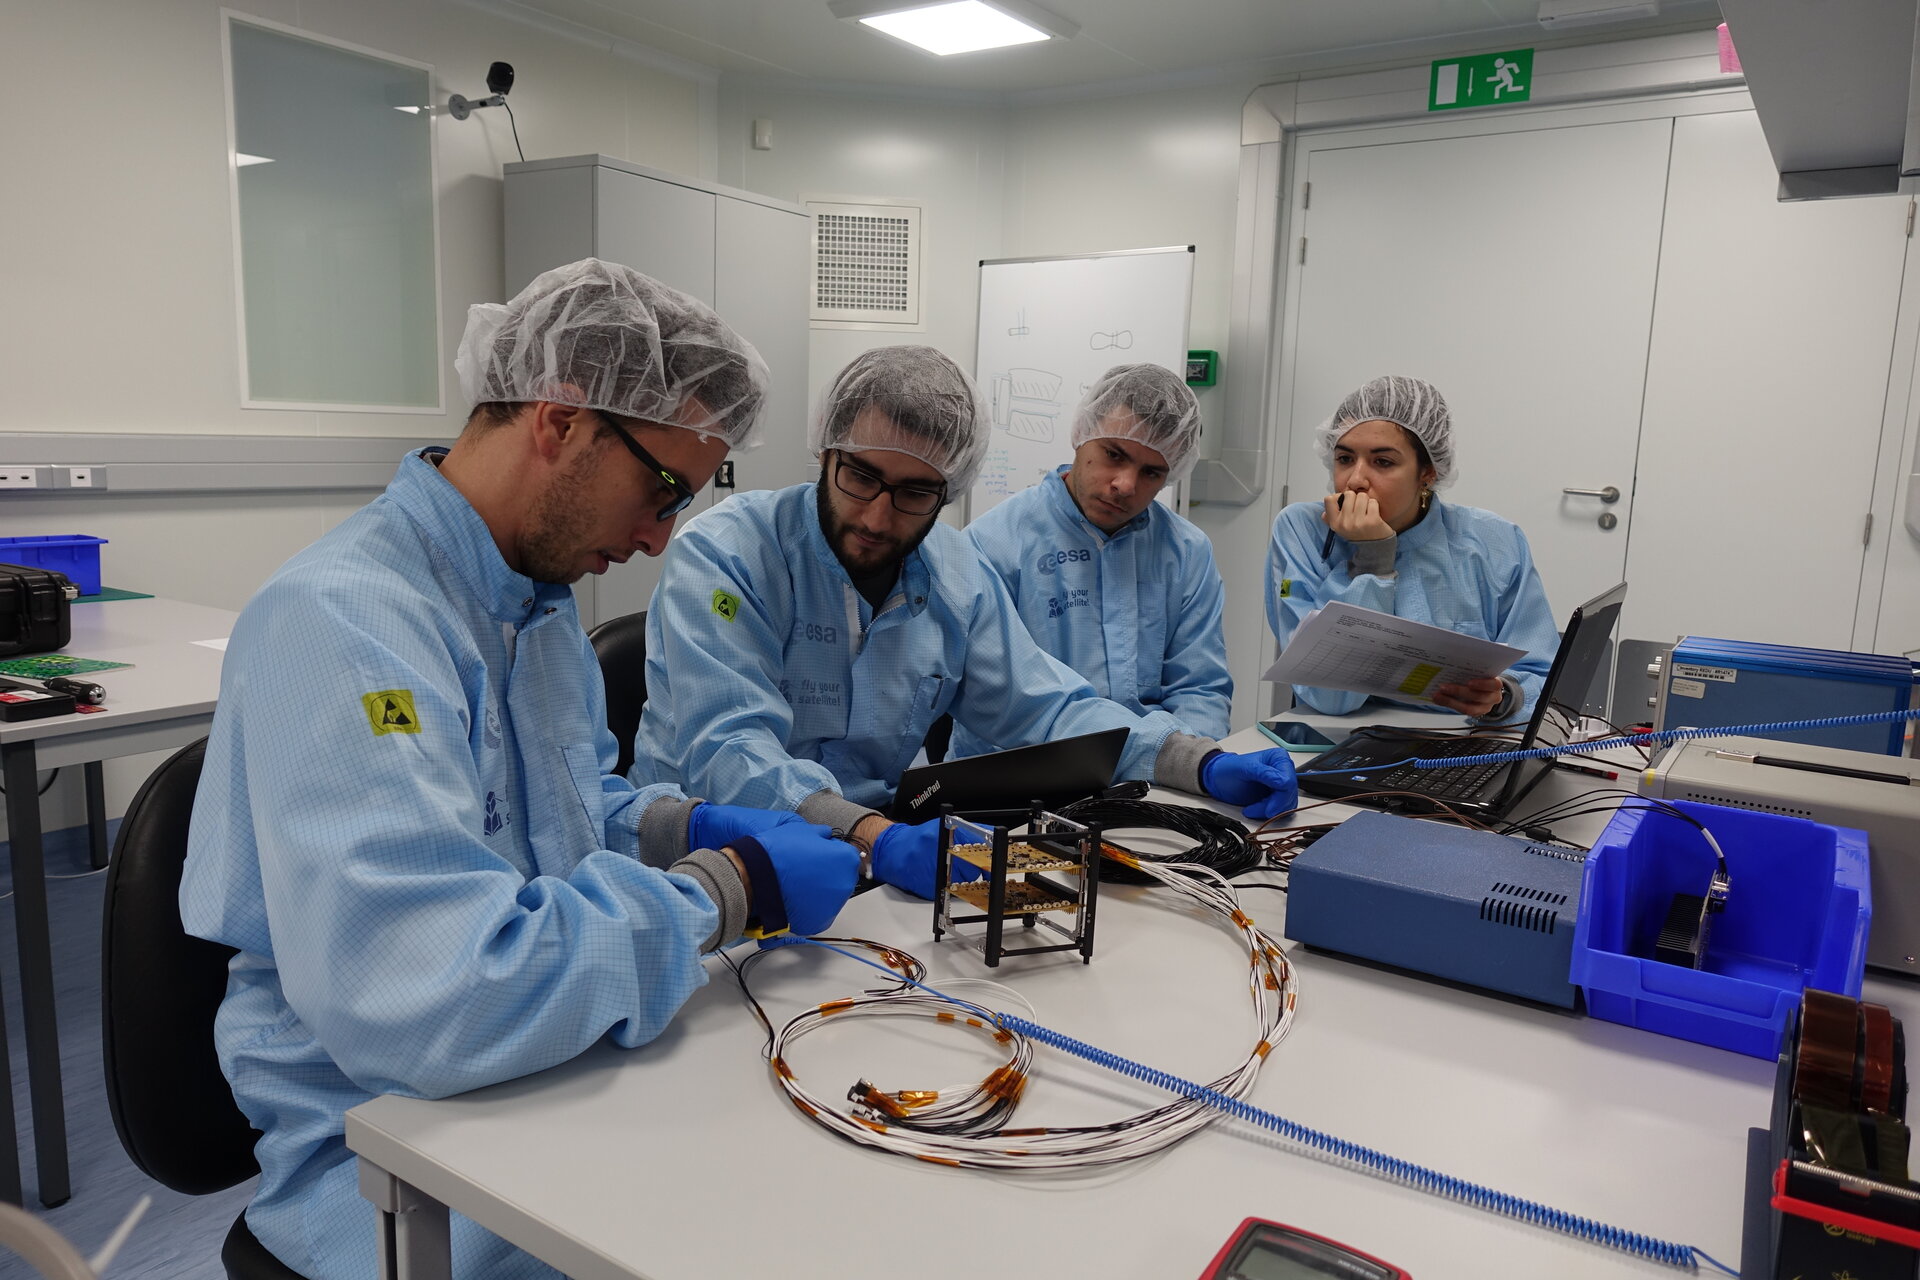 Students working together on CubeSat